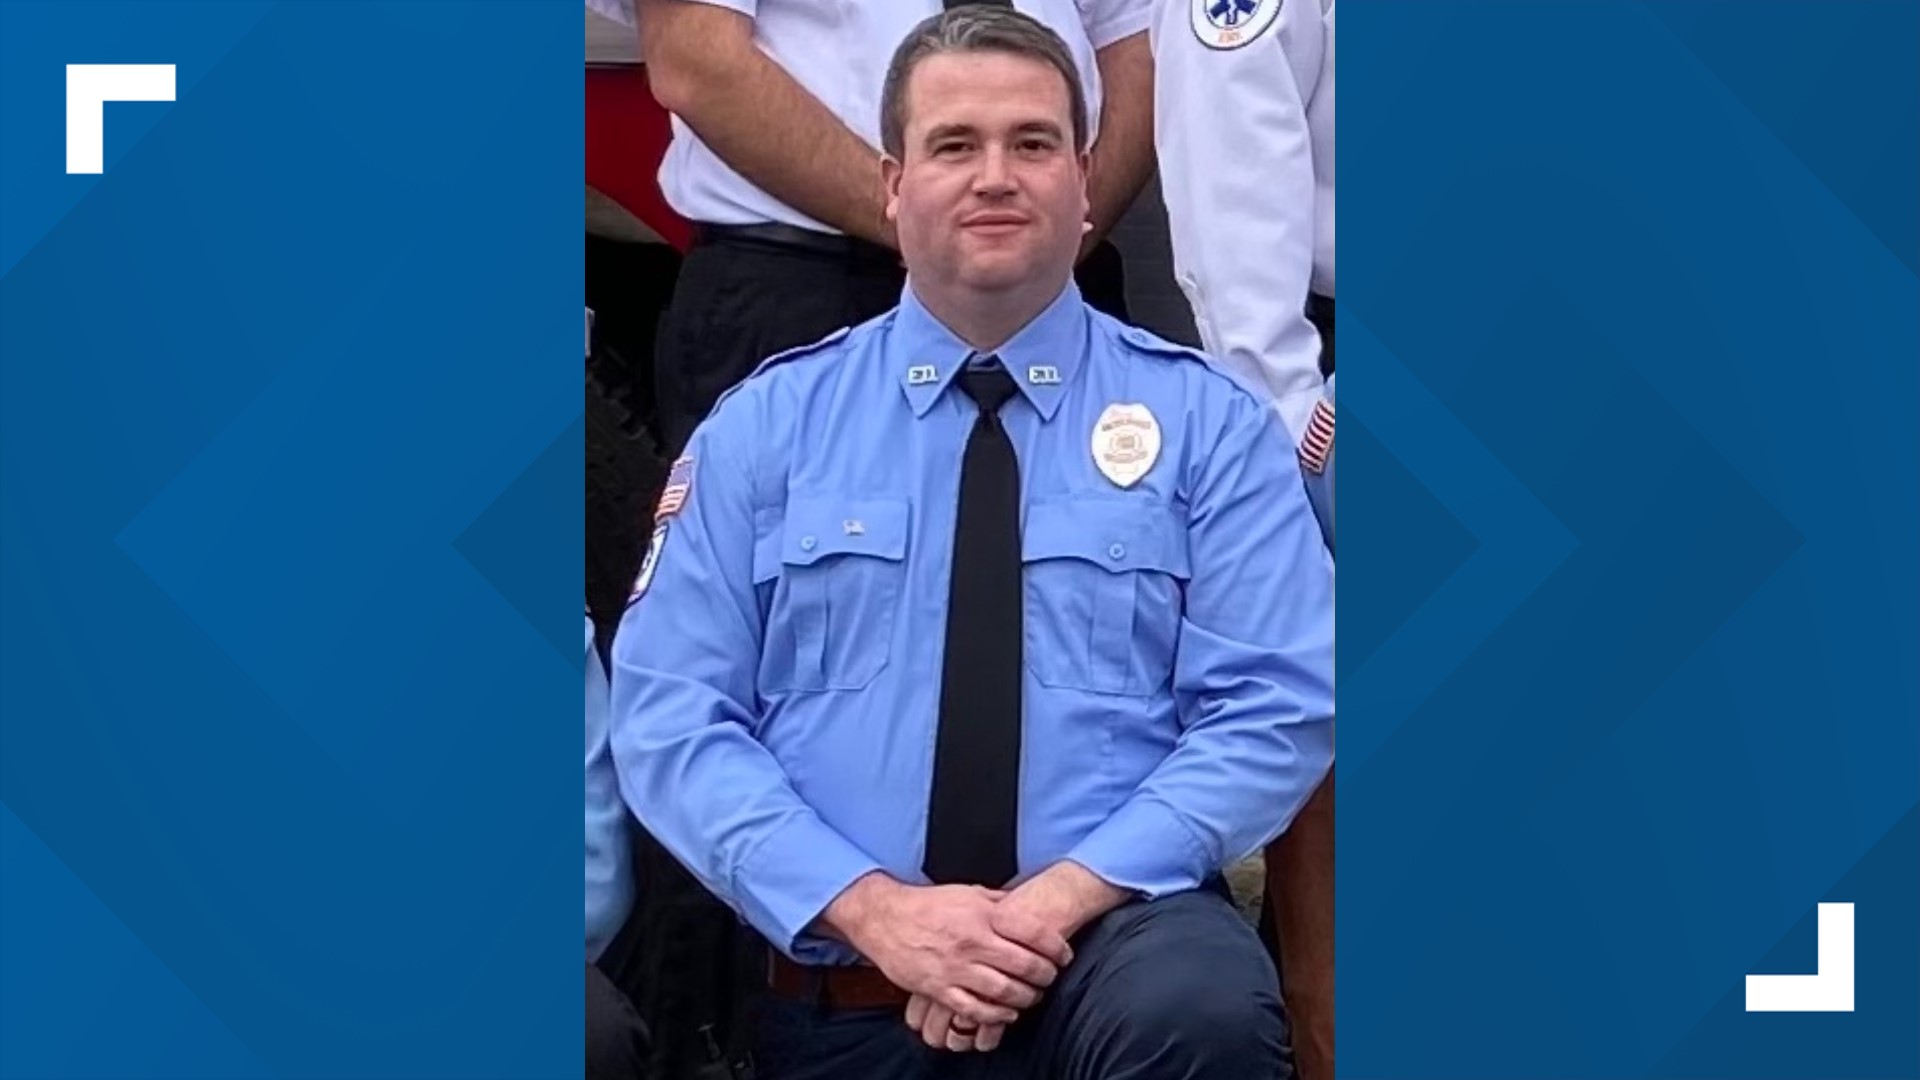 Firefighter Michael Buitendorp lost consciousness while driving a water tender truck to the scene and died at the hospital.